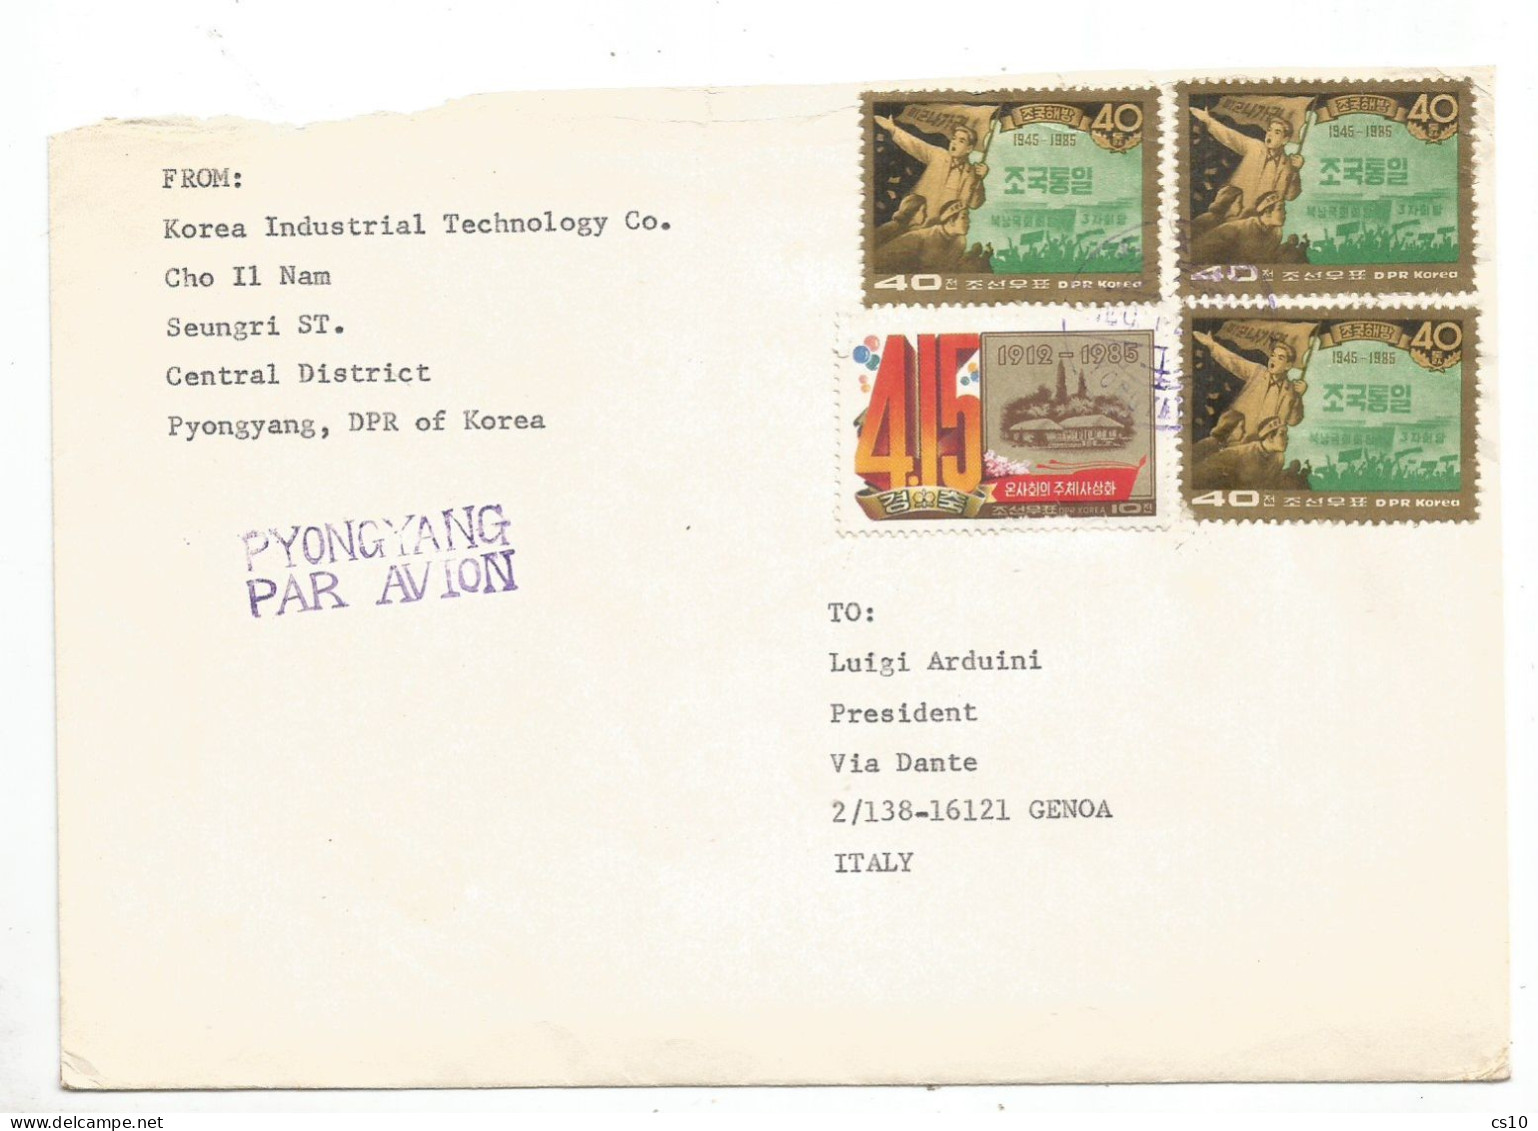 NORTH KOREA REAL MAIL : OFFICIAL COMMERCE AIR AIL COVER PYONGYANG 12DEC1985 X ITALY With 4 STAMPS !!!!! - Corea Del Nord